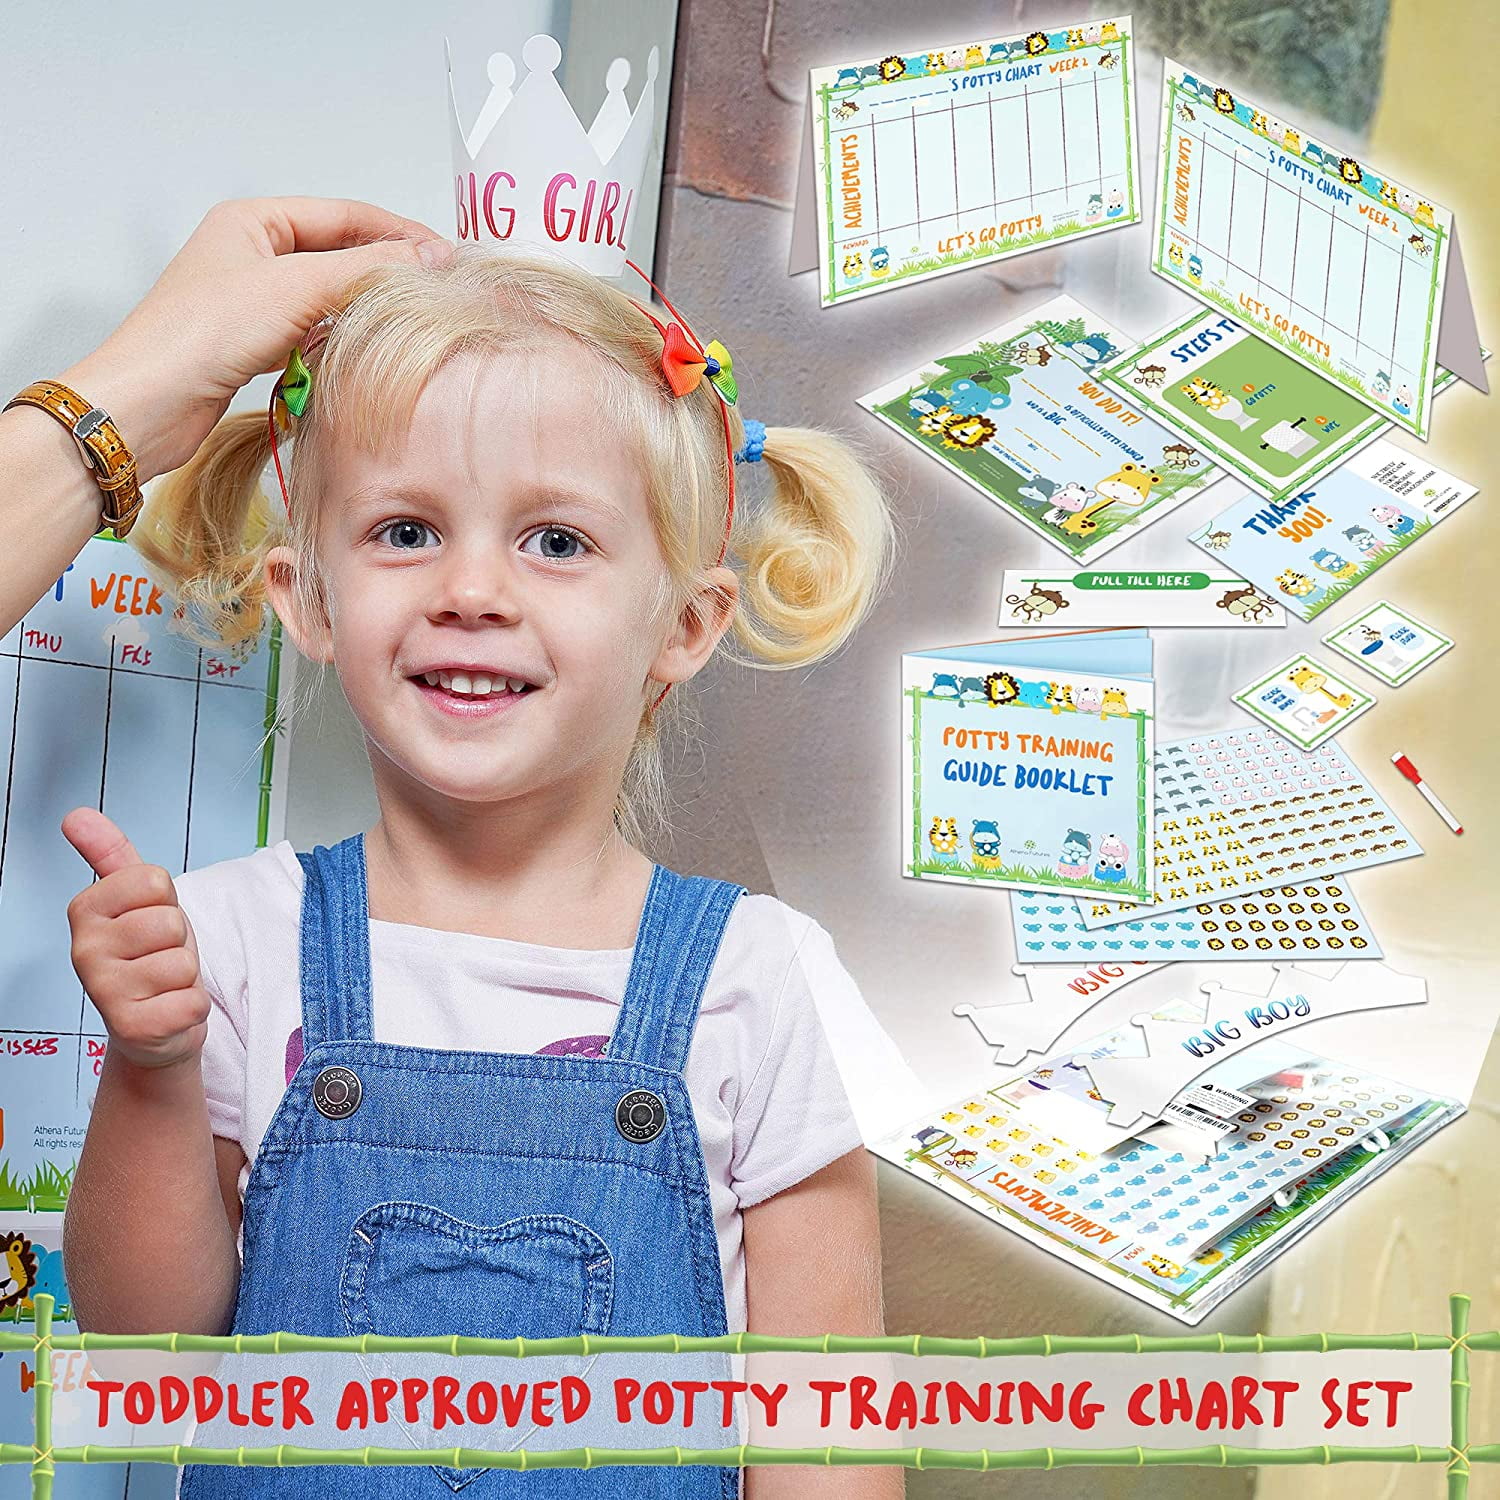 Potty Training Chart for Toddlers,Boys,Girls - Animal Design - Magnetic  Sticker Chart, Waterproof Magnetic Potty Training Reward Chart,  Certificate, 3 Instruction Steps, 35 Magnetic Stickers Funny Animal Theme